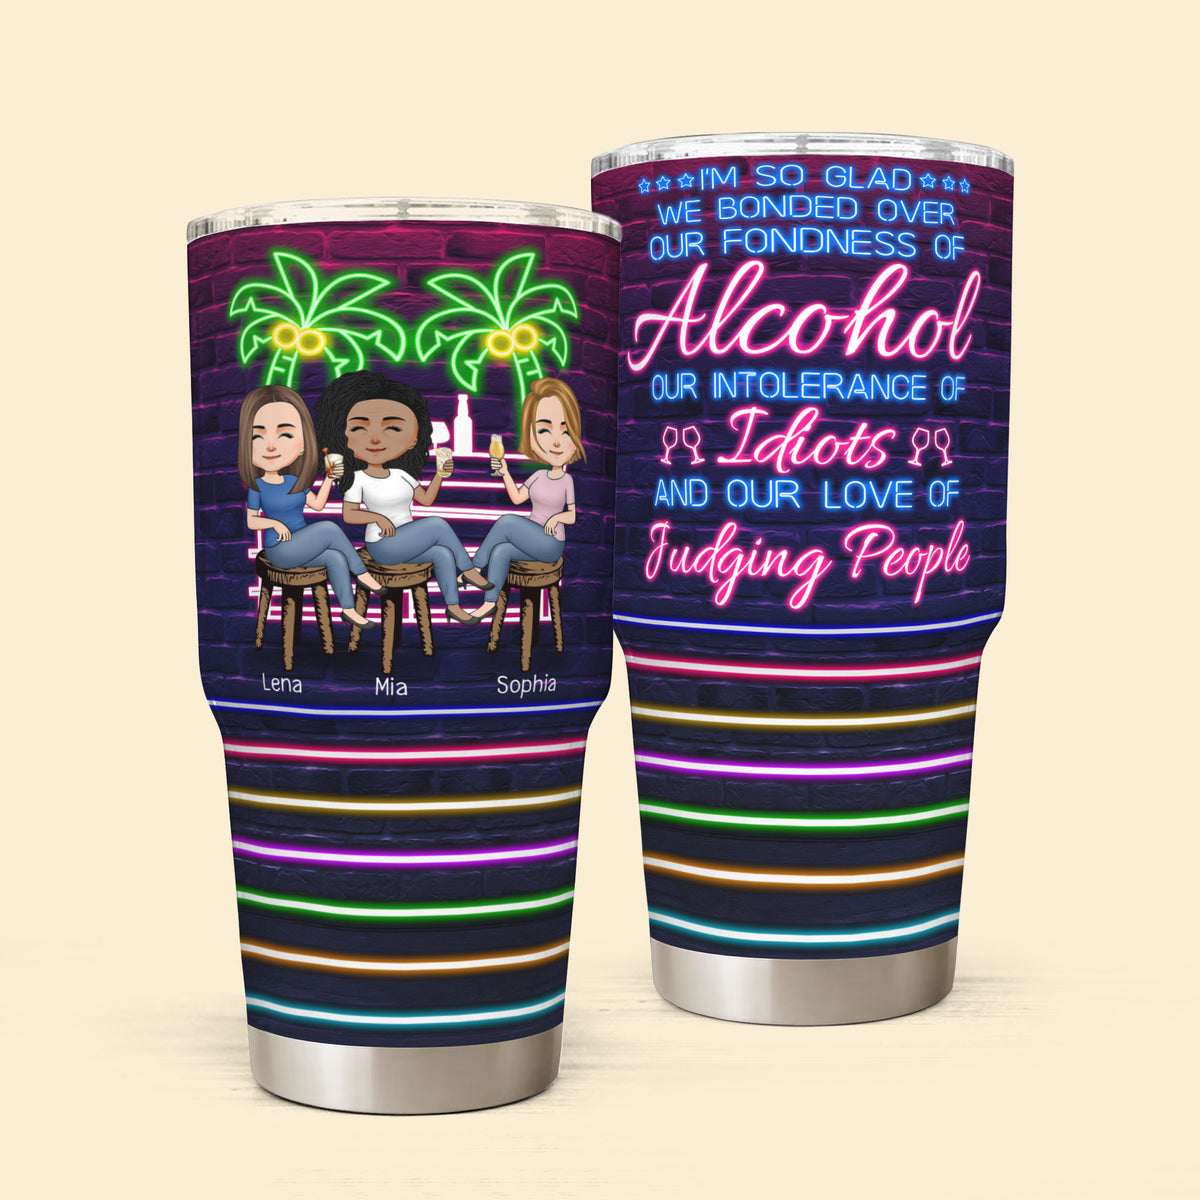 Bonding Over Alcohol - Personalized Tumbler Cup - Birthday Gift For  Besties, Soul Sisters, Sistas, Bff, Friends - Drinking Girls